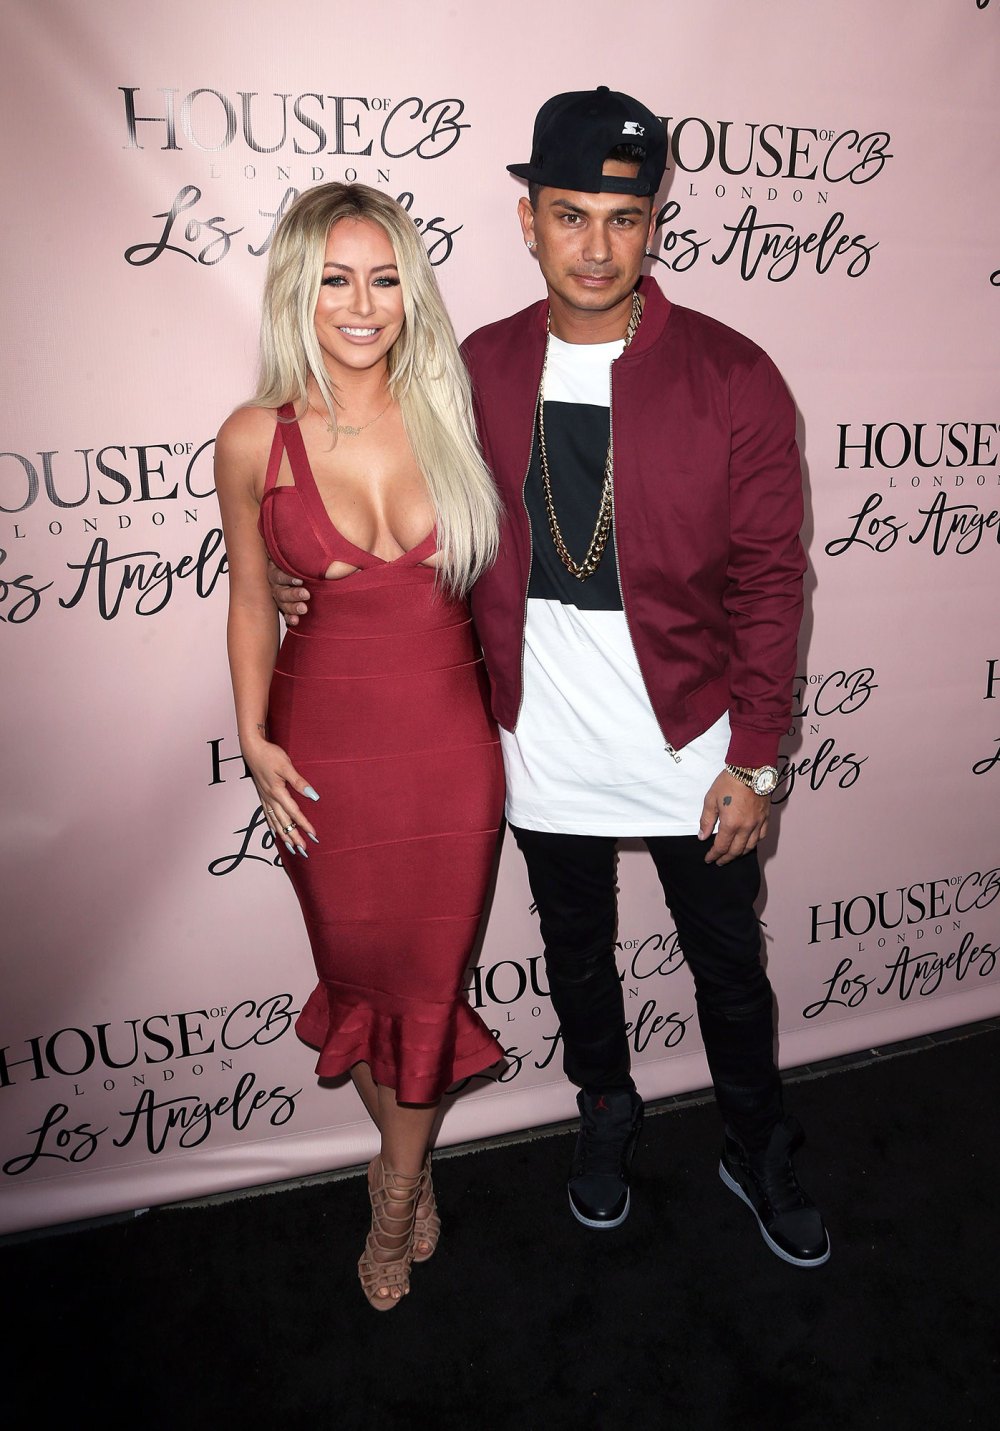 Aubrey O’Day Reveals Pauly D’s Penis Is Pierced: ‘It Triggers the Right Spots’